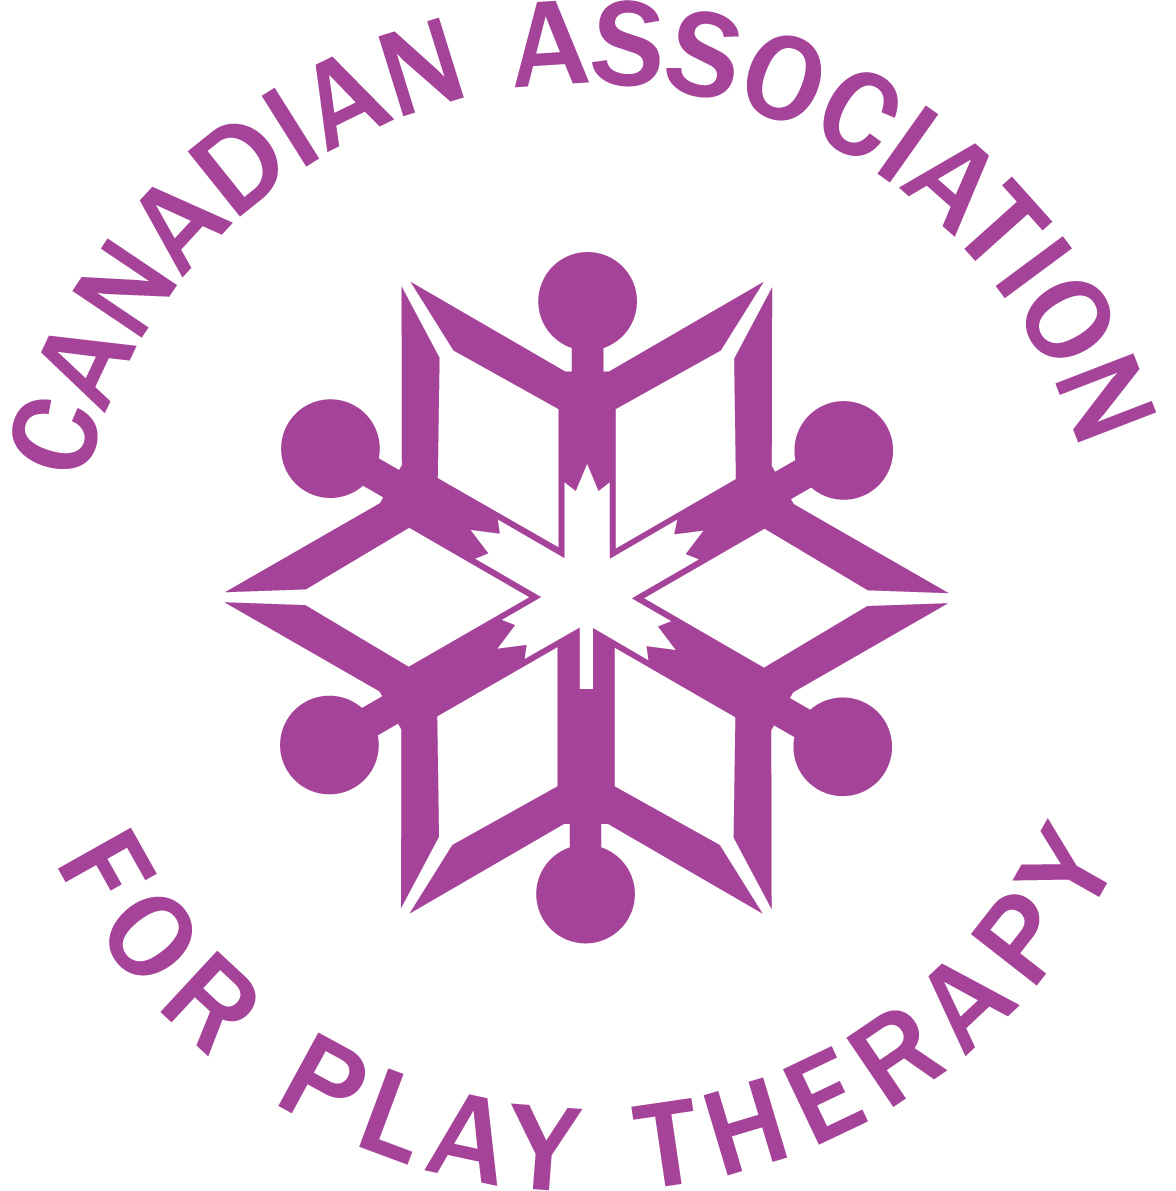 Association for Play Therapy